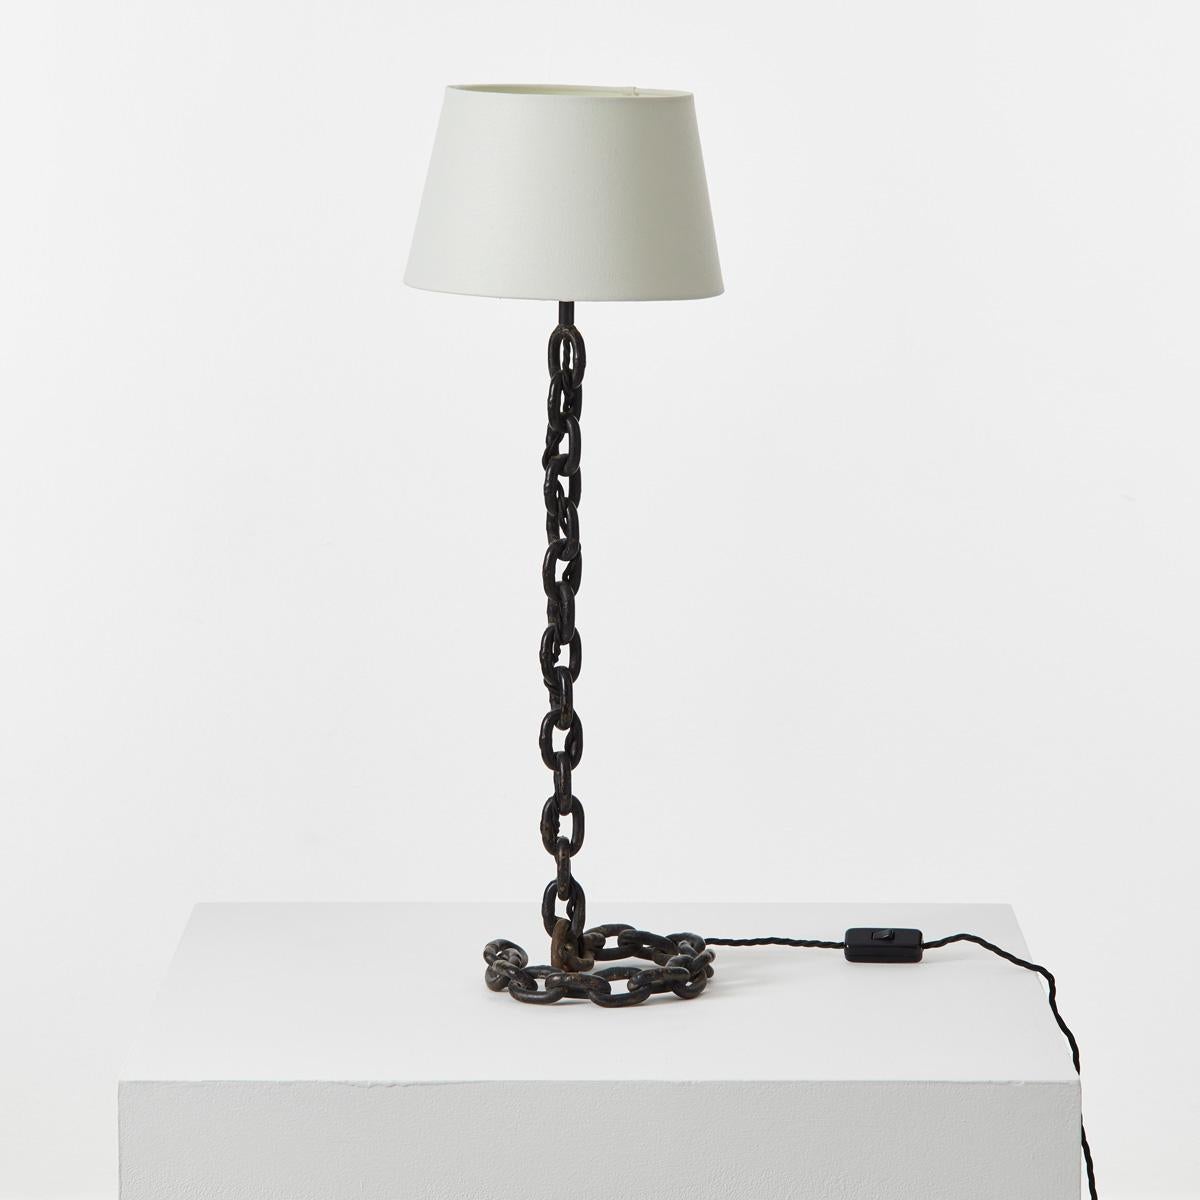 An unconventional table lamp in the manner of artist Franz West. Seemingly defying gravity, its welded iron stem drapes and curls into a circular base. Playful and elegant in equal measure.
 